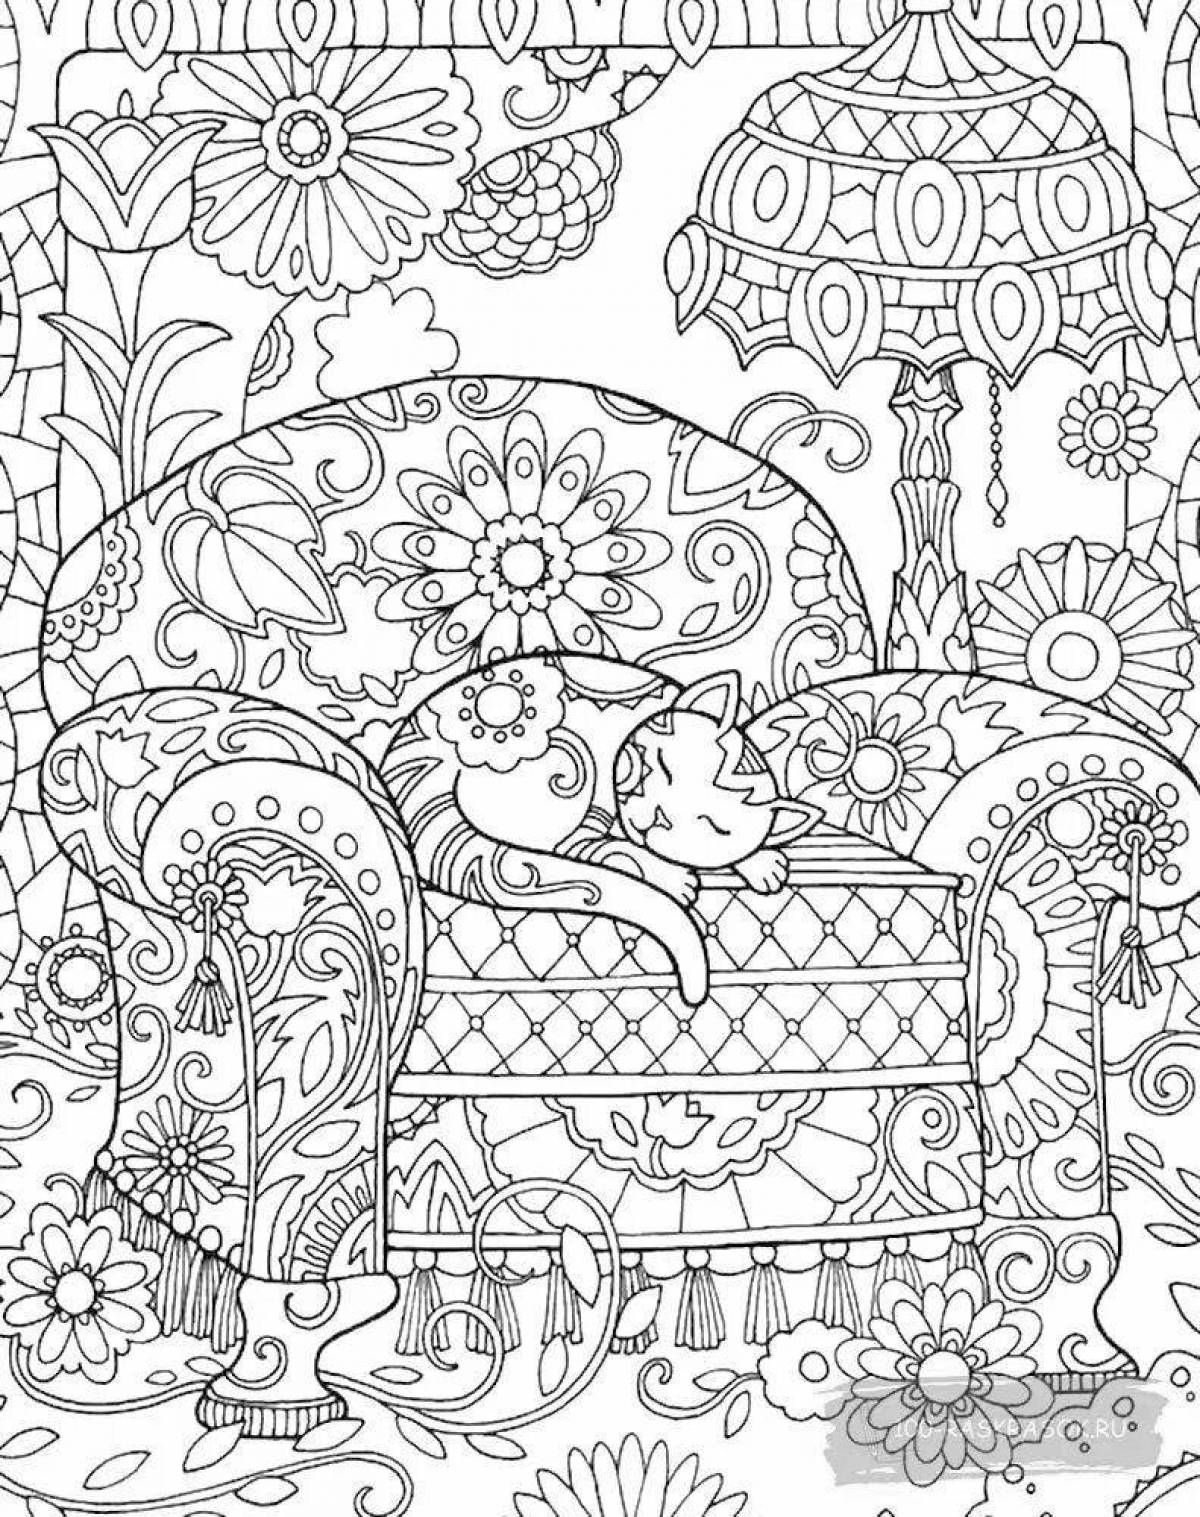 Inspirational coloring book for adults